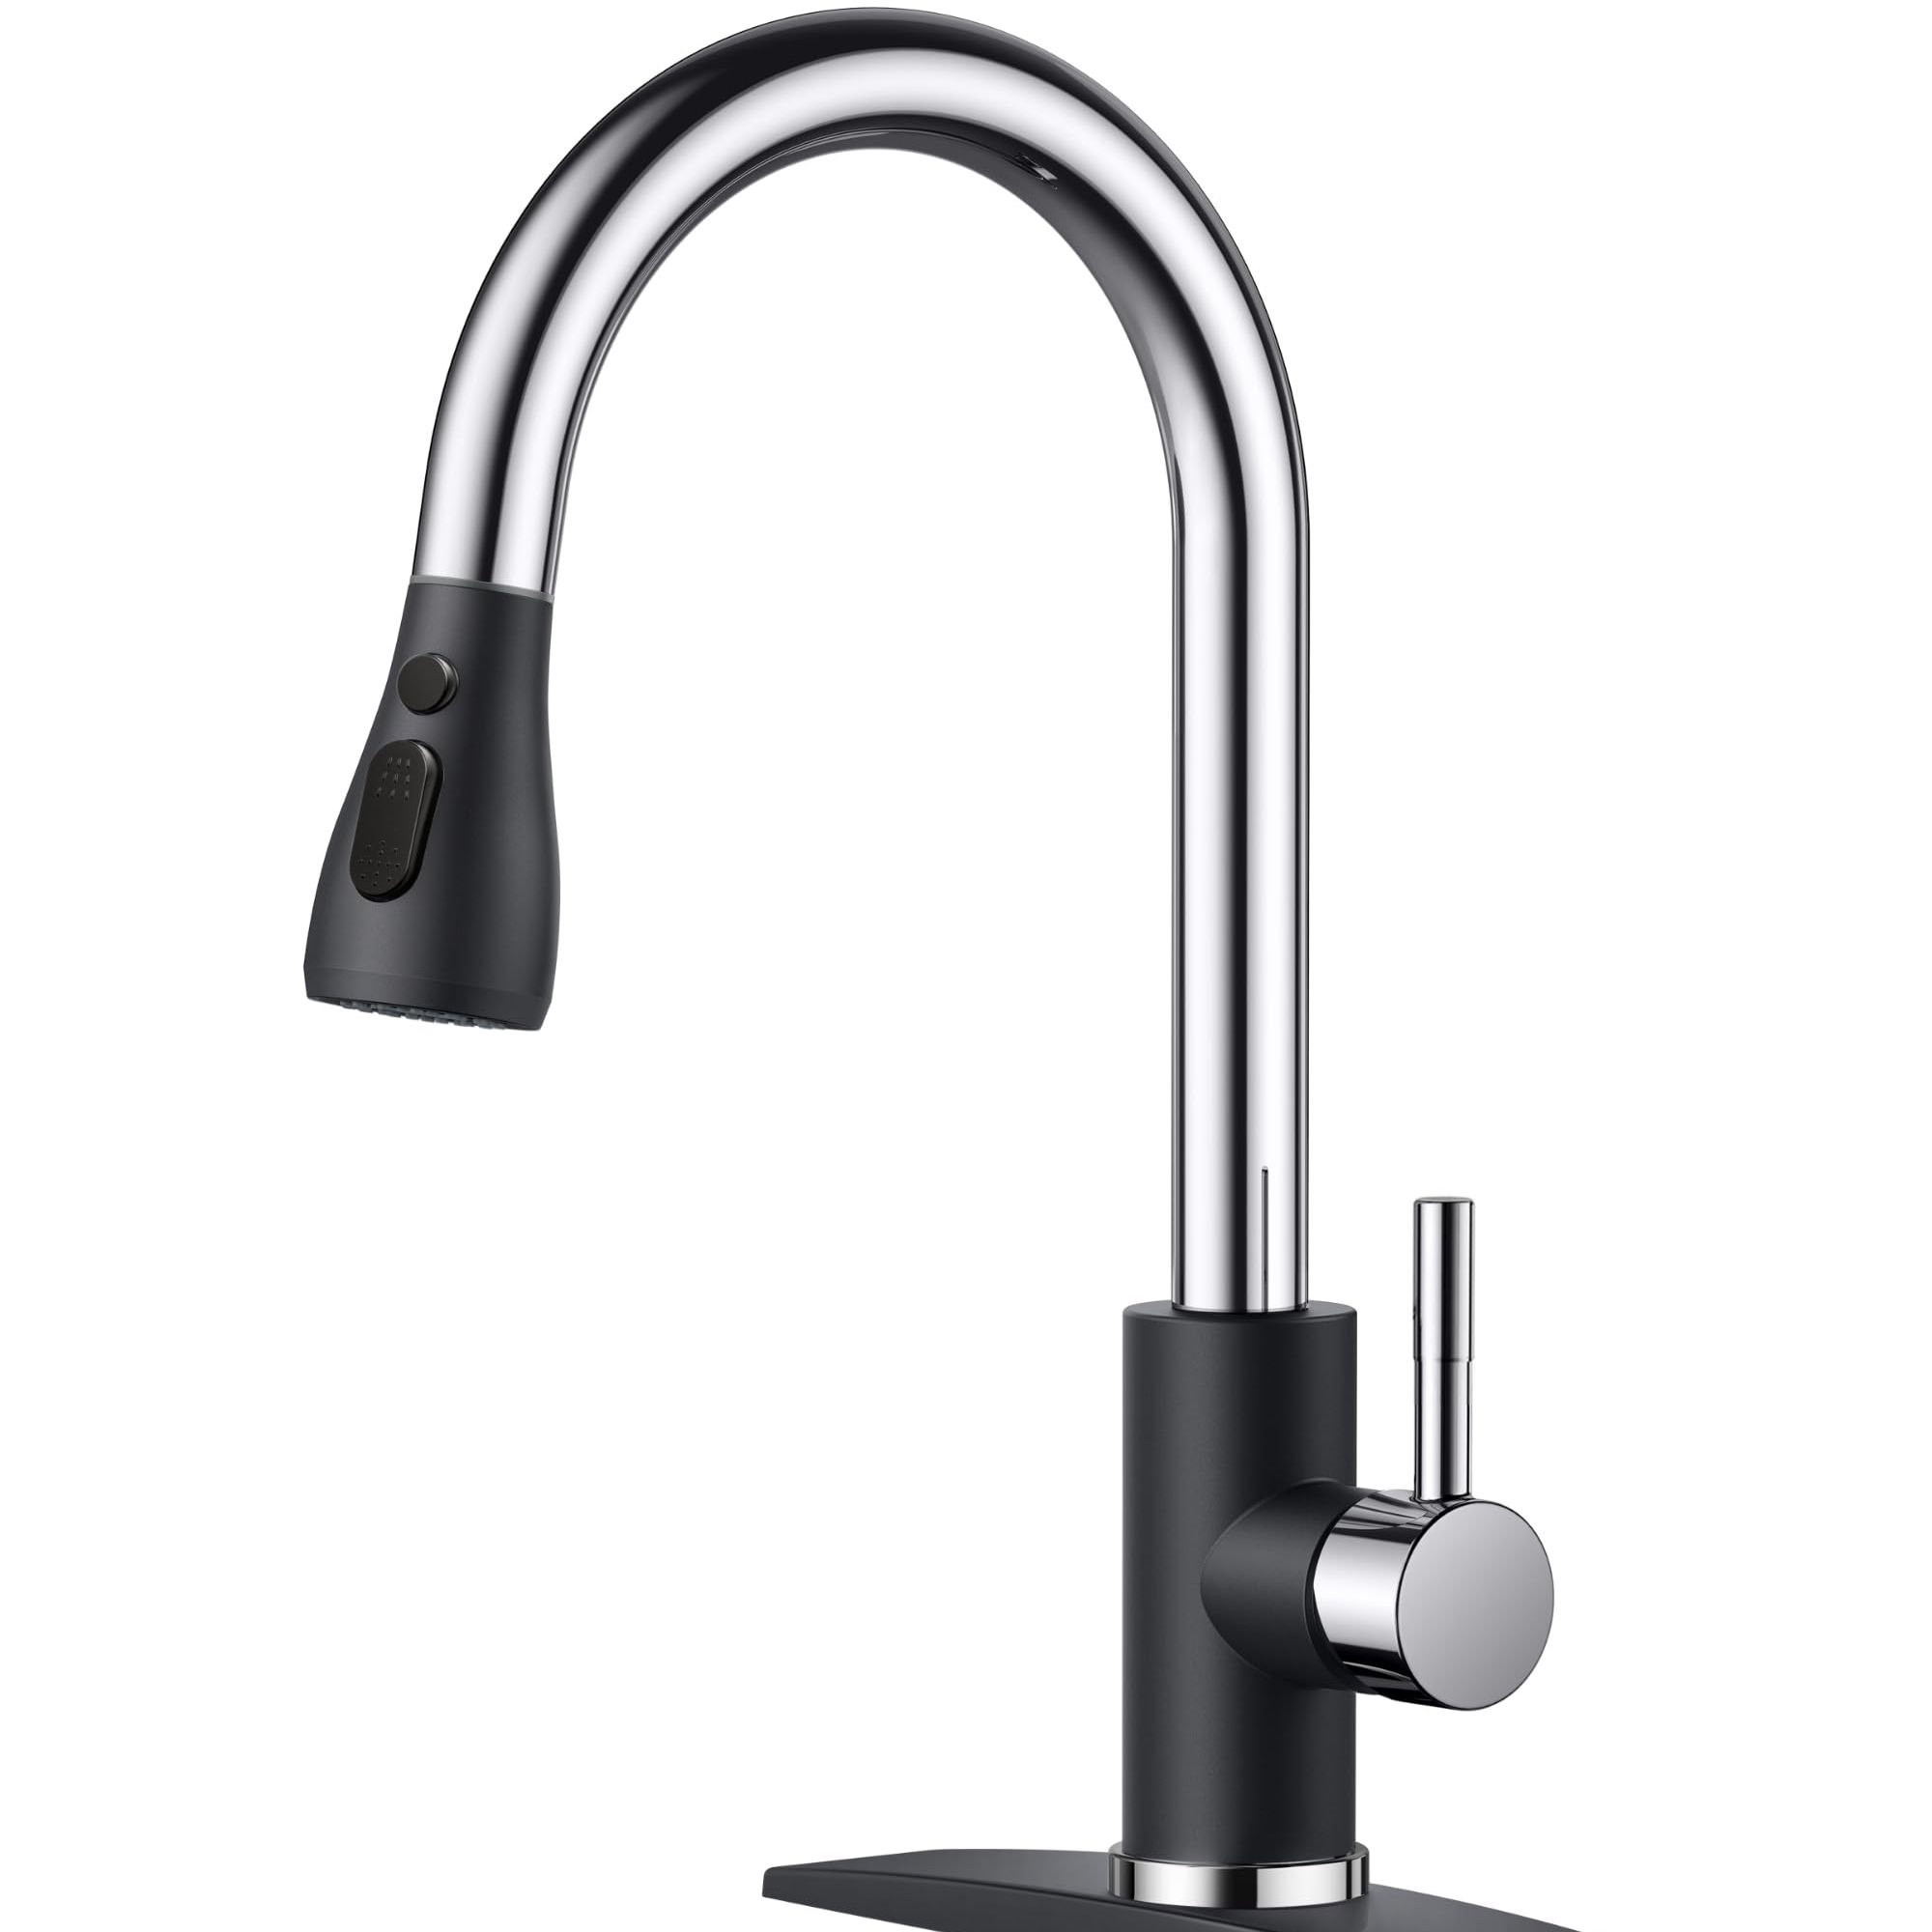 The 5 Best Kitchen Faucets of 